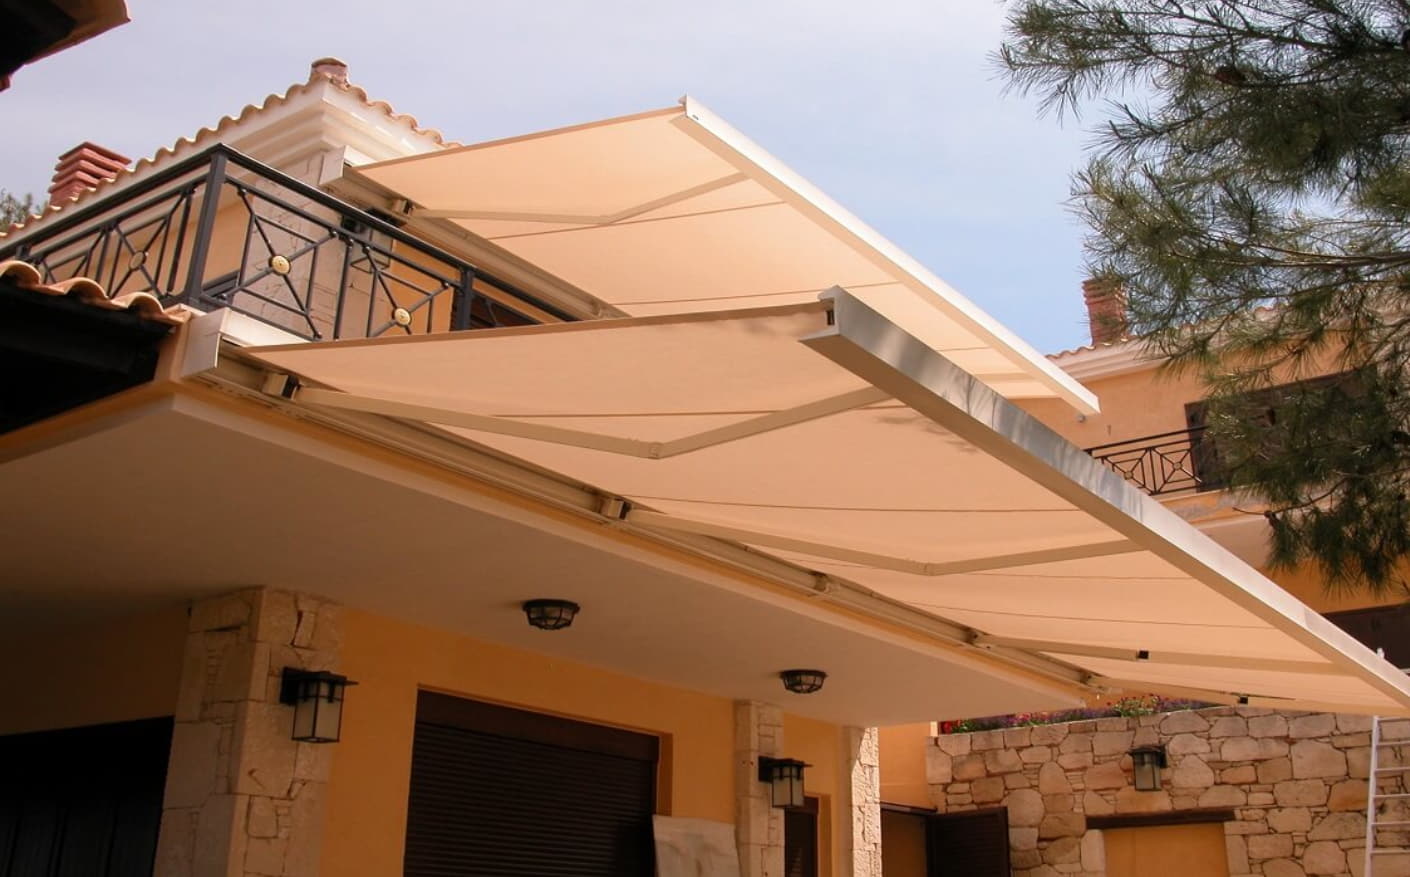 extendable awnings in Sydney